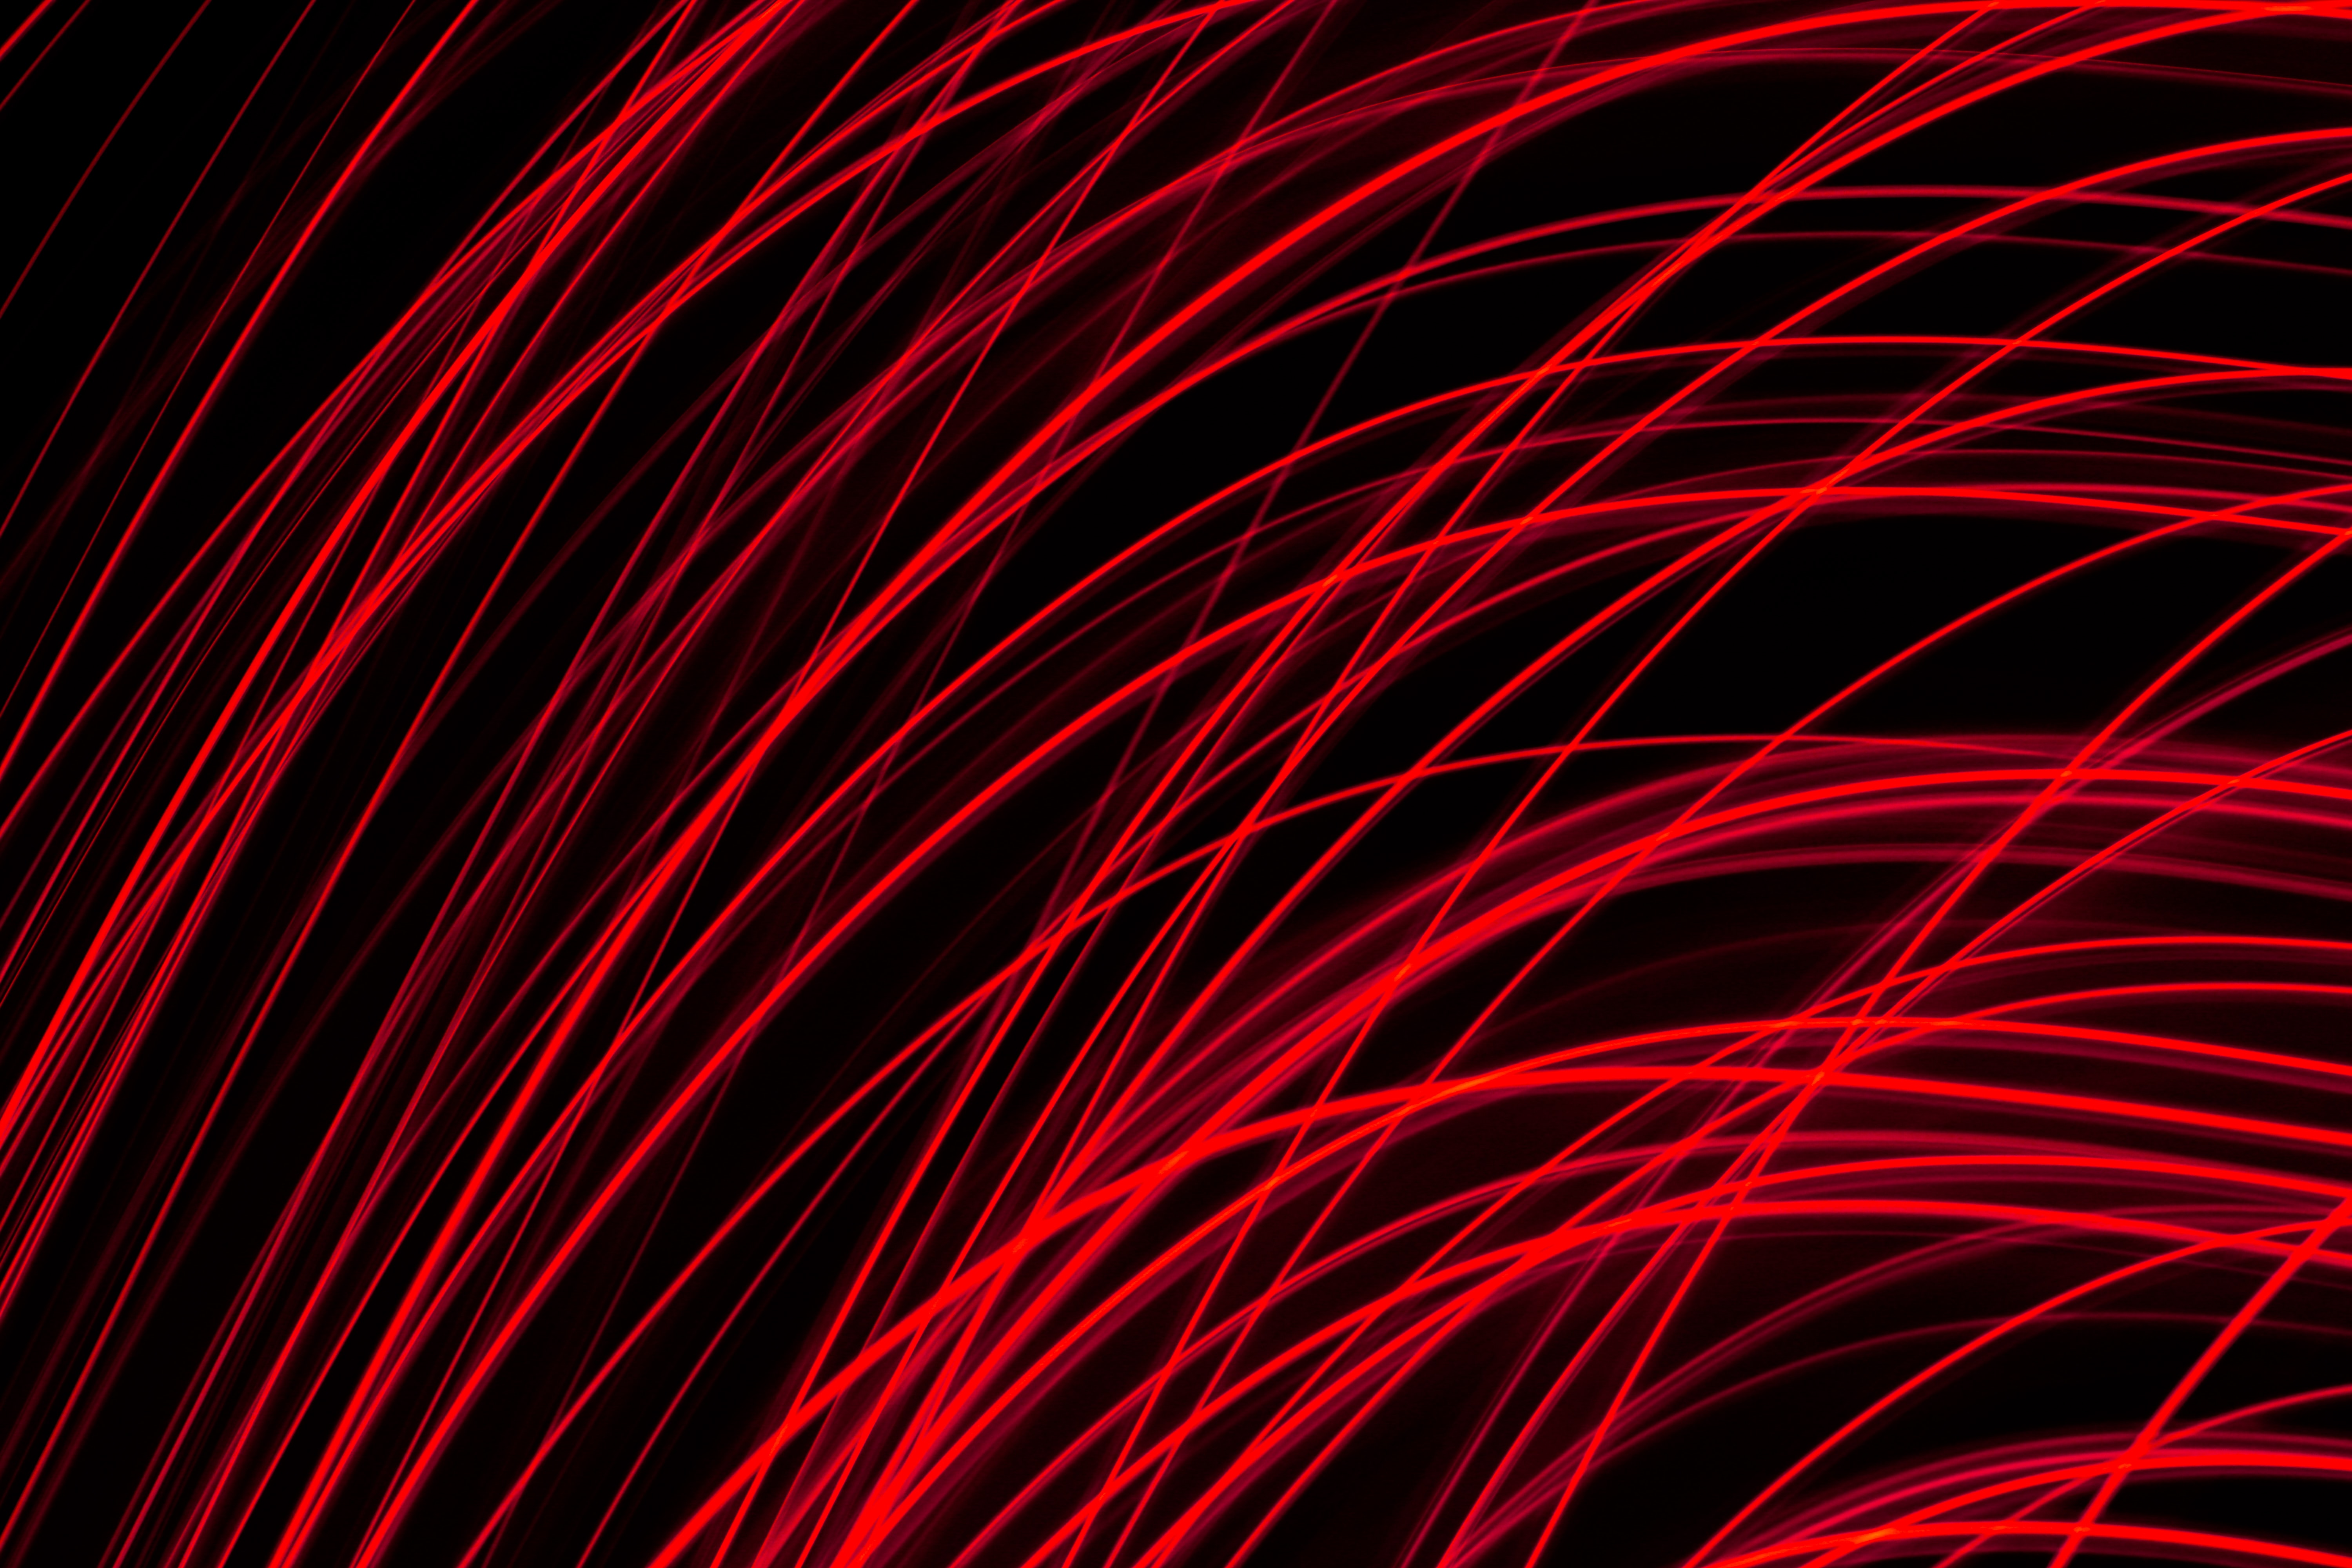 94603 download wallpaper stripes, abstract, red, lines, streaks, glow screensavers and pictures for free